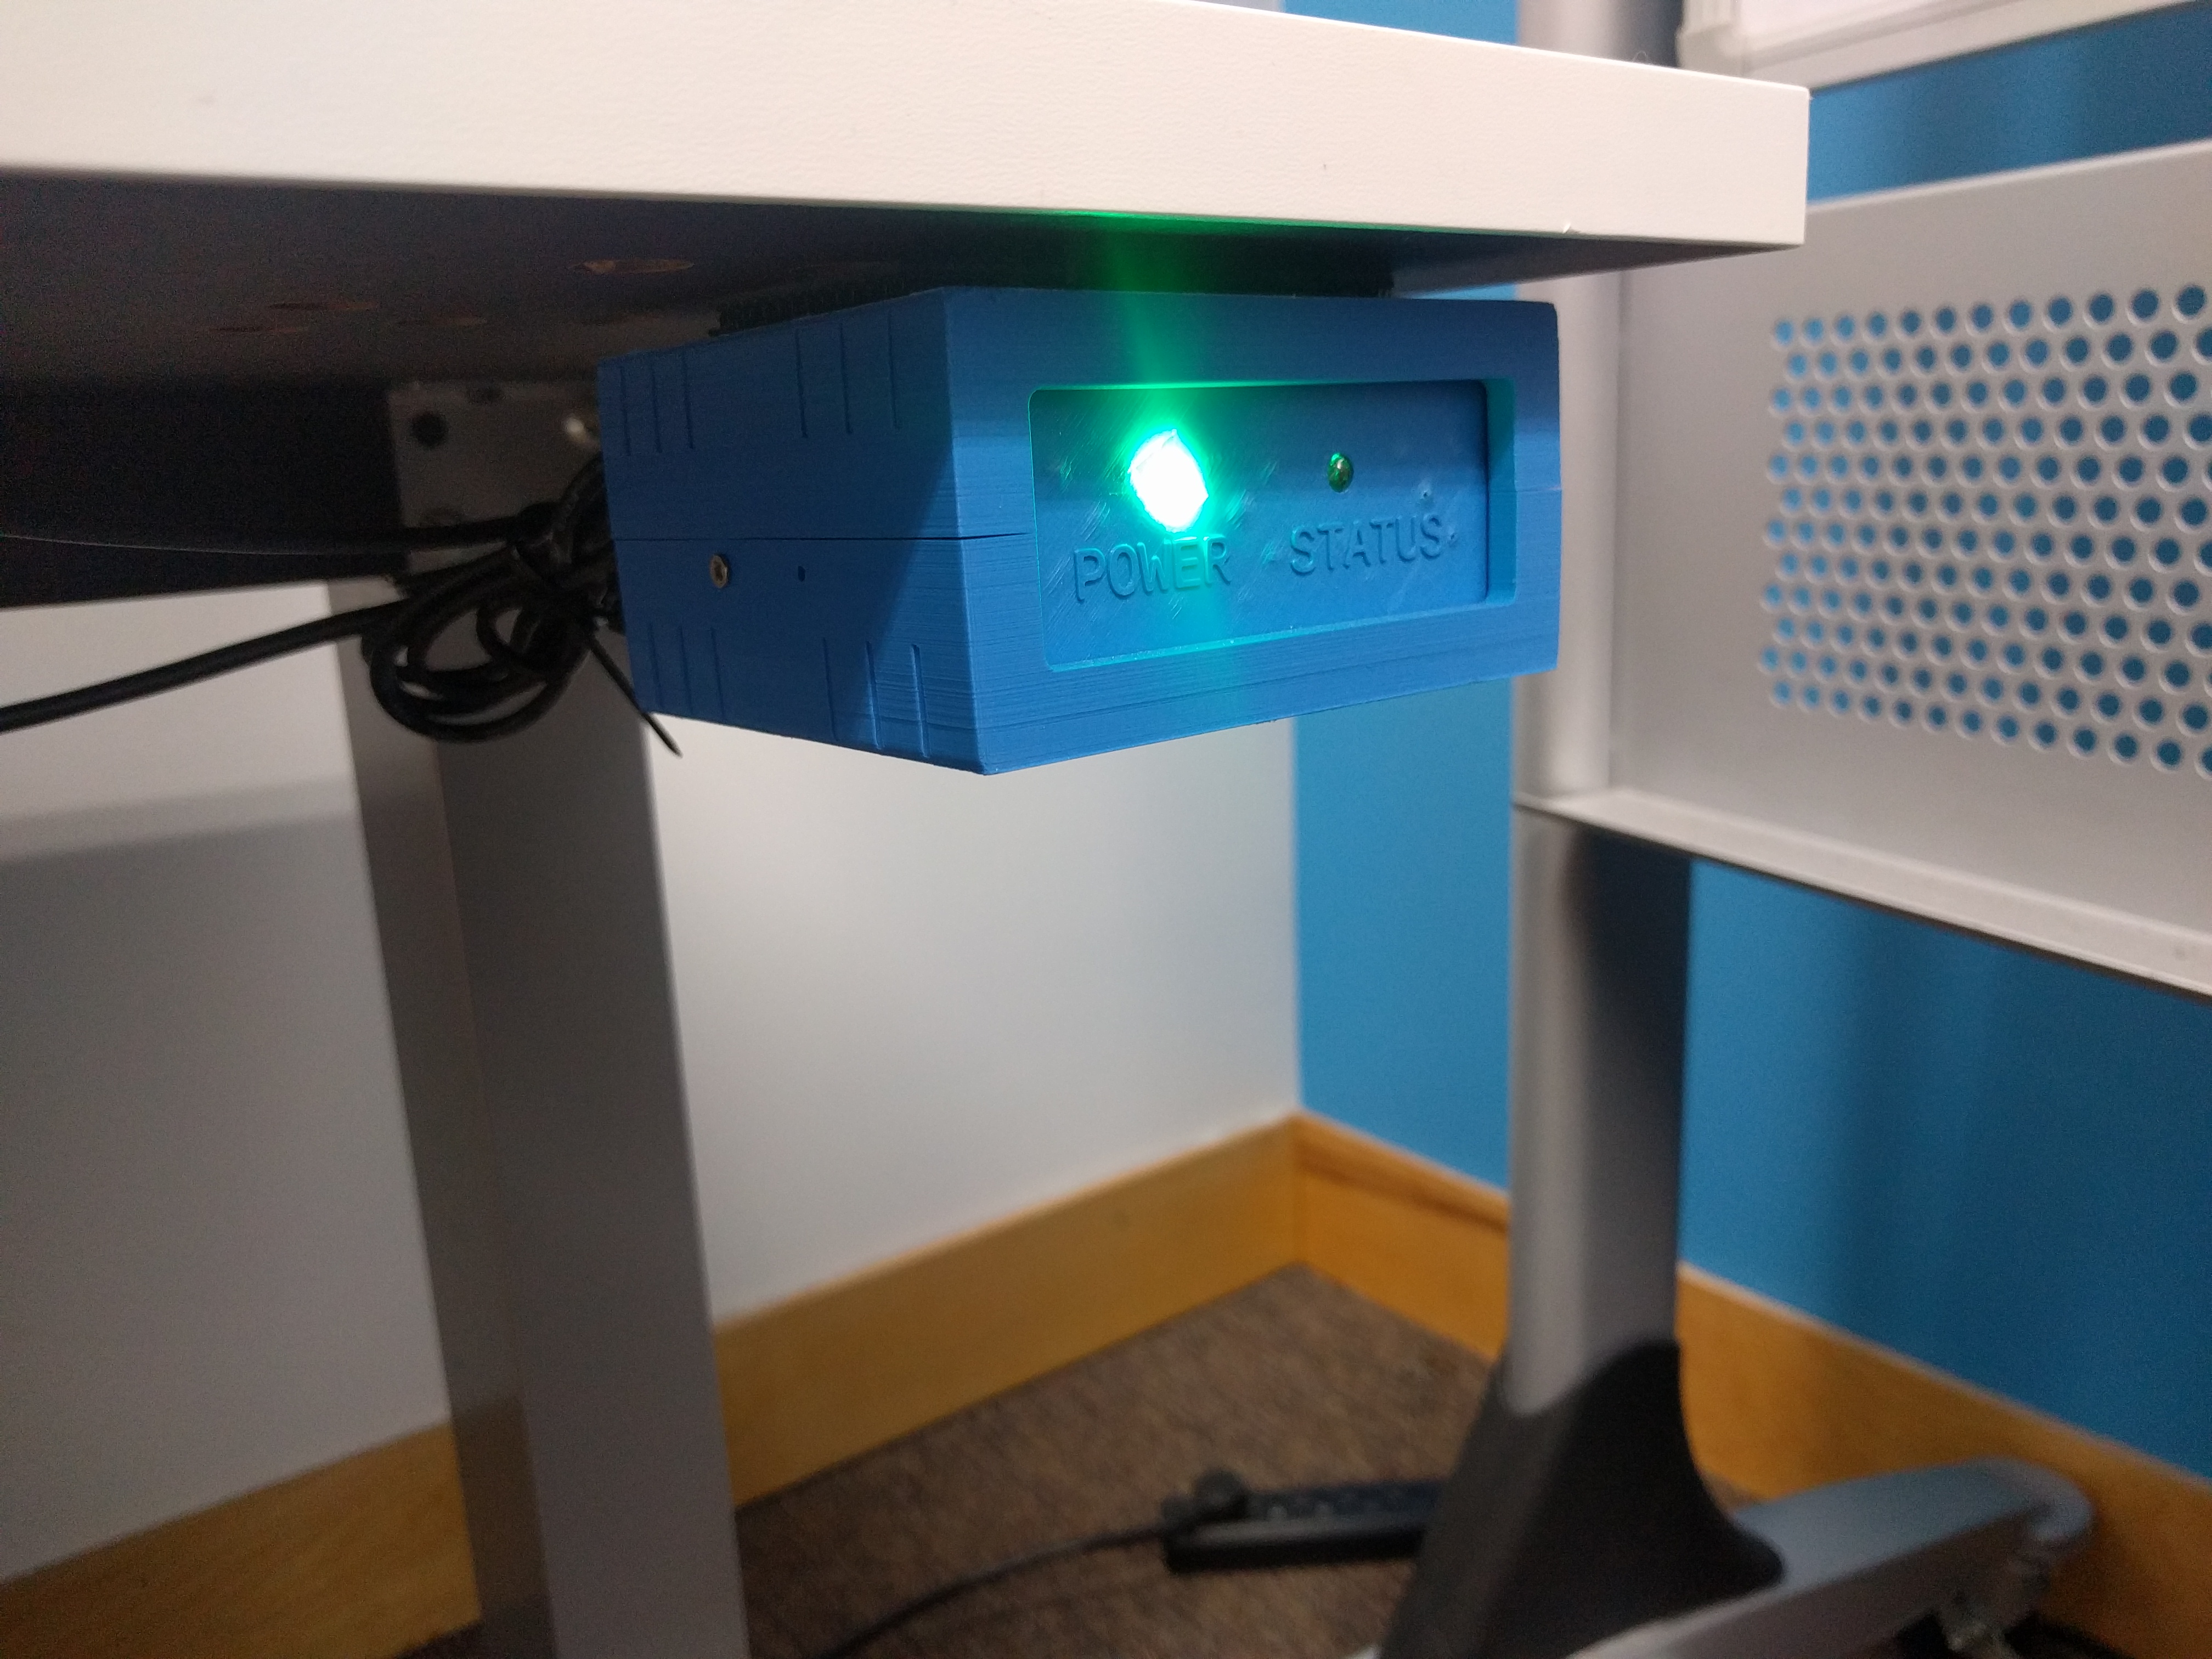 the logicdata controller mounted to the desk